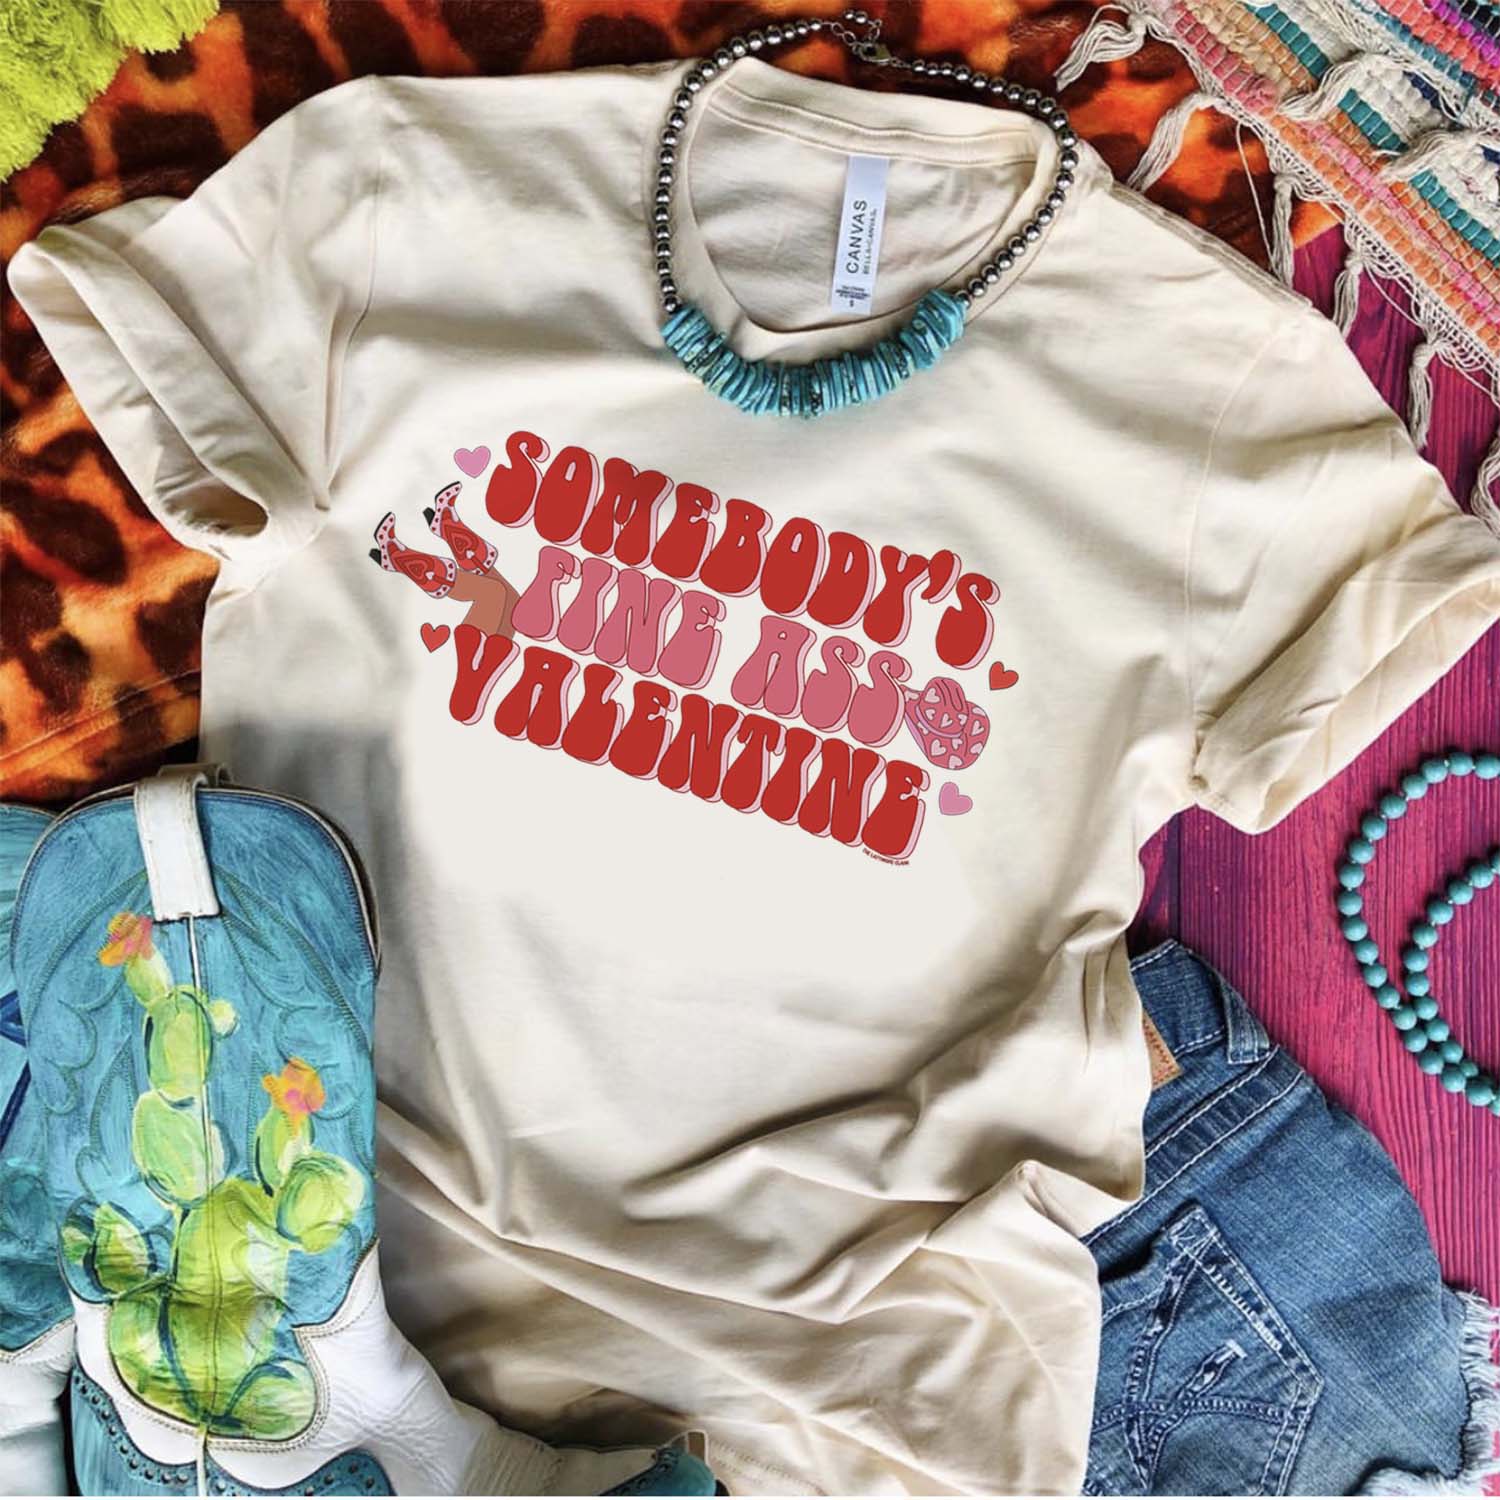 This crew neck cream tee is shown here as a flatlay with rolled sleeves on a multi-colored background. It is paired with a turquoise necklace, denim shorts, and turquoise boots with a cactus. The graphic says "Somebody's Fine Ass Valentine" in pink and red bubble font with hearts throughout. There is also legs with cowboy boots on the left side (looking at the tee) and a pink cowboy hat with hearts on the right side of the graphic (if looking directly at the tee). 